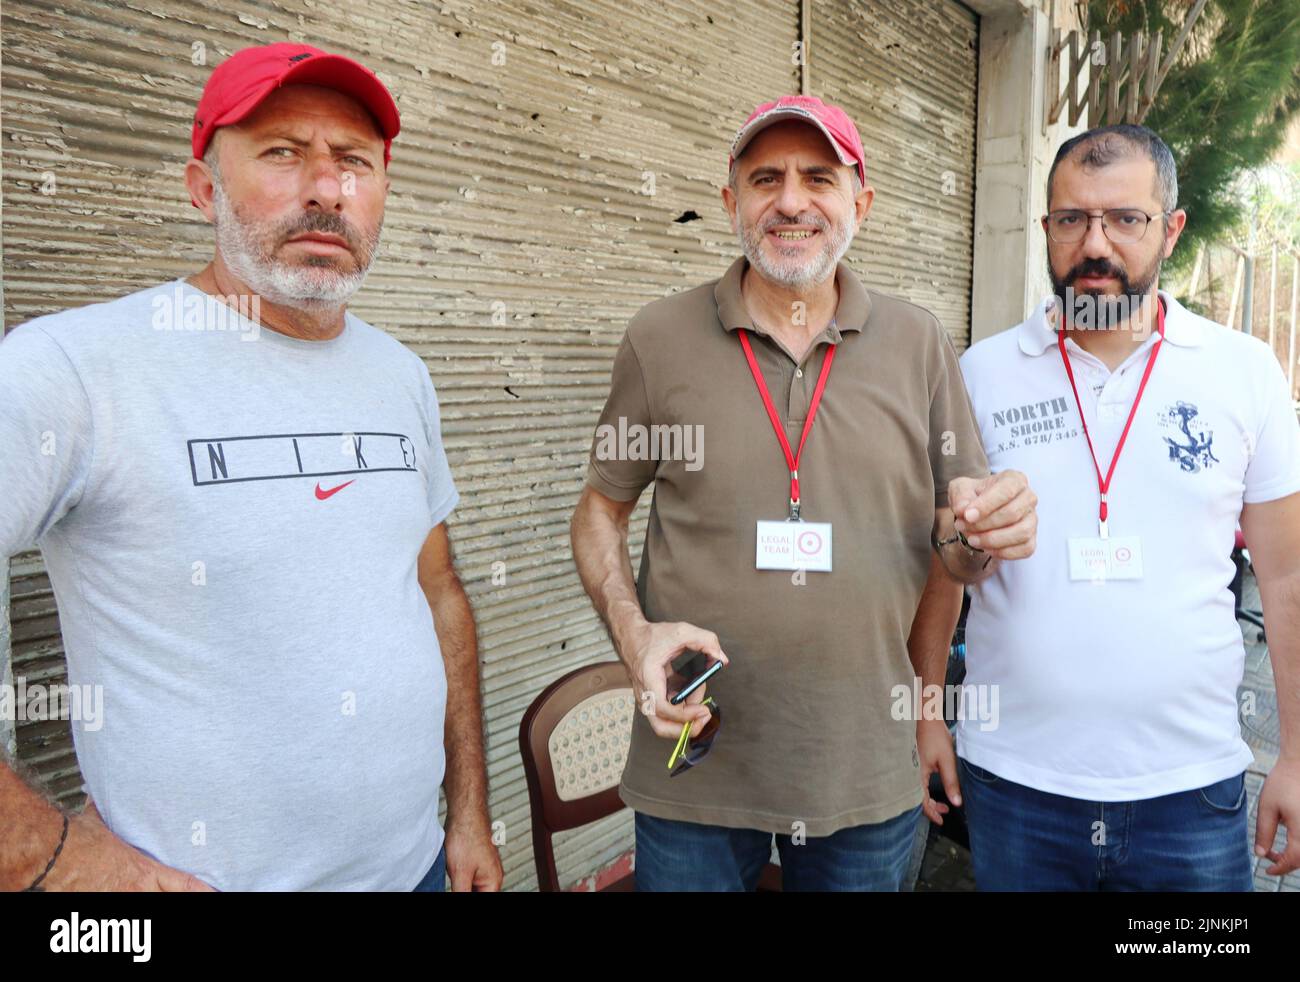 Brother Atef al-Sheikh Hussein (left) and his legal team wait for the release of Bassam al-Sheikh Hussein, deteinee in the headquarter of Intelligence Police Department, Beirut, Lebanon, August 12 2022. On August 11 Bassam al-Sheikh entered the Federal Bank in Hamra district, Beirut, with a gun and some fuel threatening to set himself on fire unless he was allowed to take out his own money. According to Lebanese medias, the man wanted to withdraw his 210.000 USD deposit, which was frozen by the bank since the outbreak of the country's economic crisis in 2019. In the end the depositor surrender Stock Photo